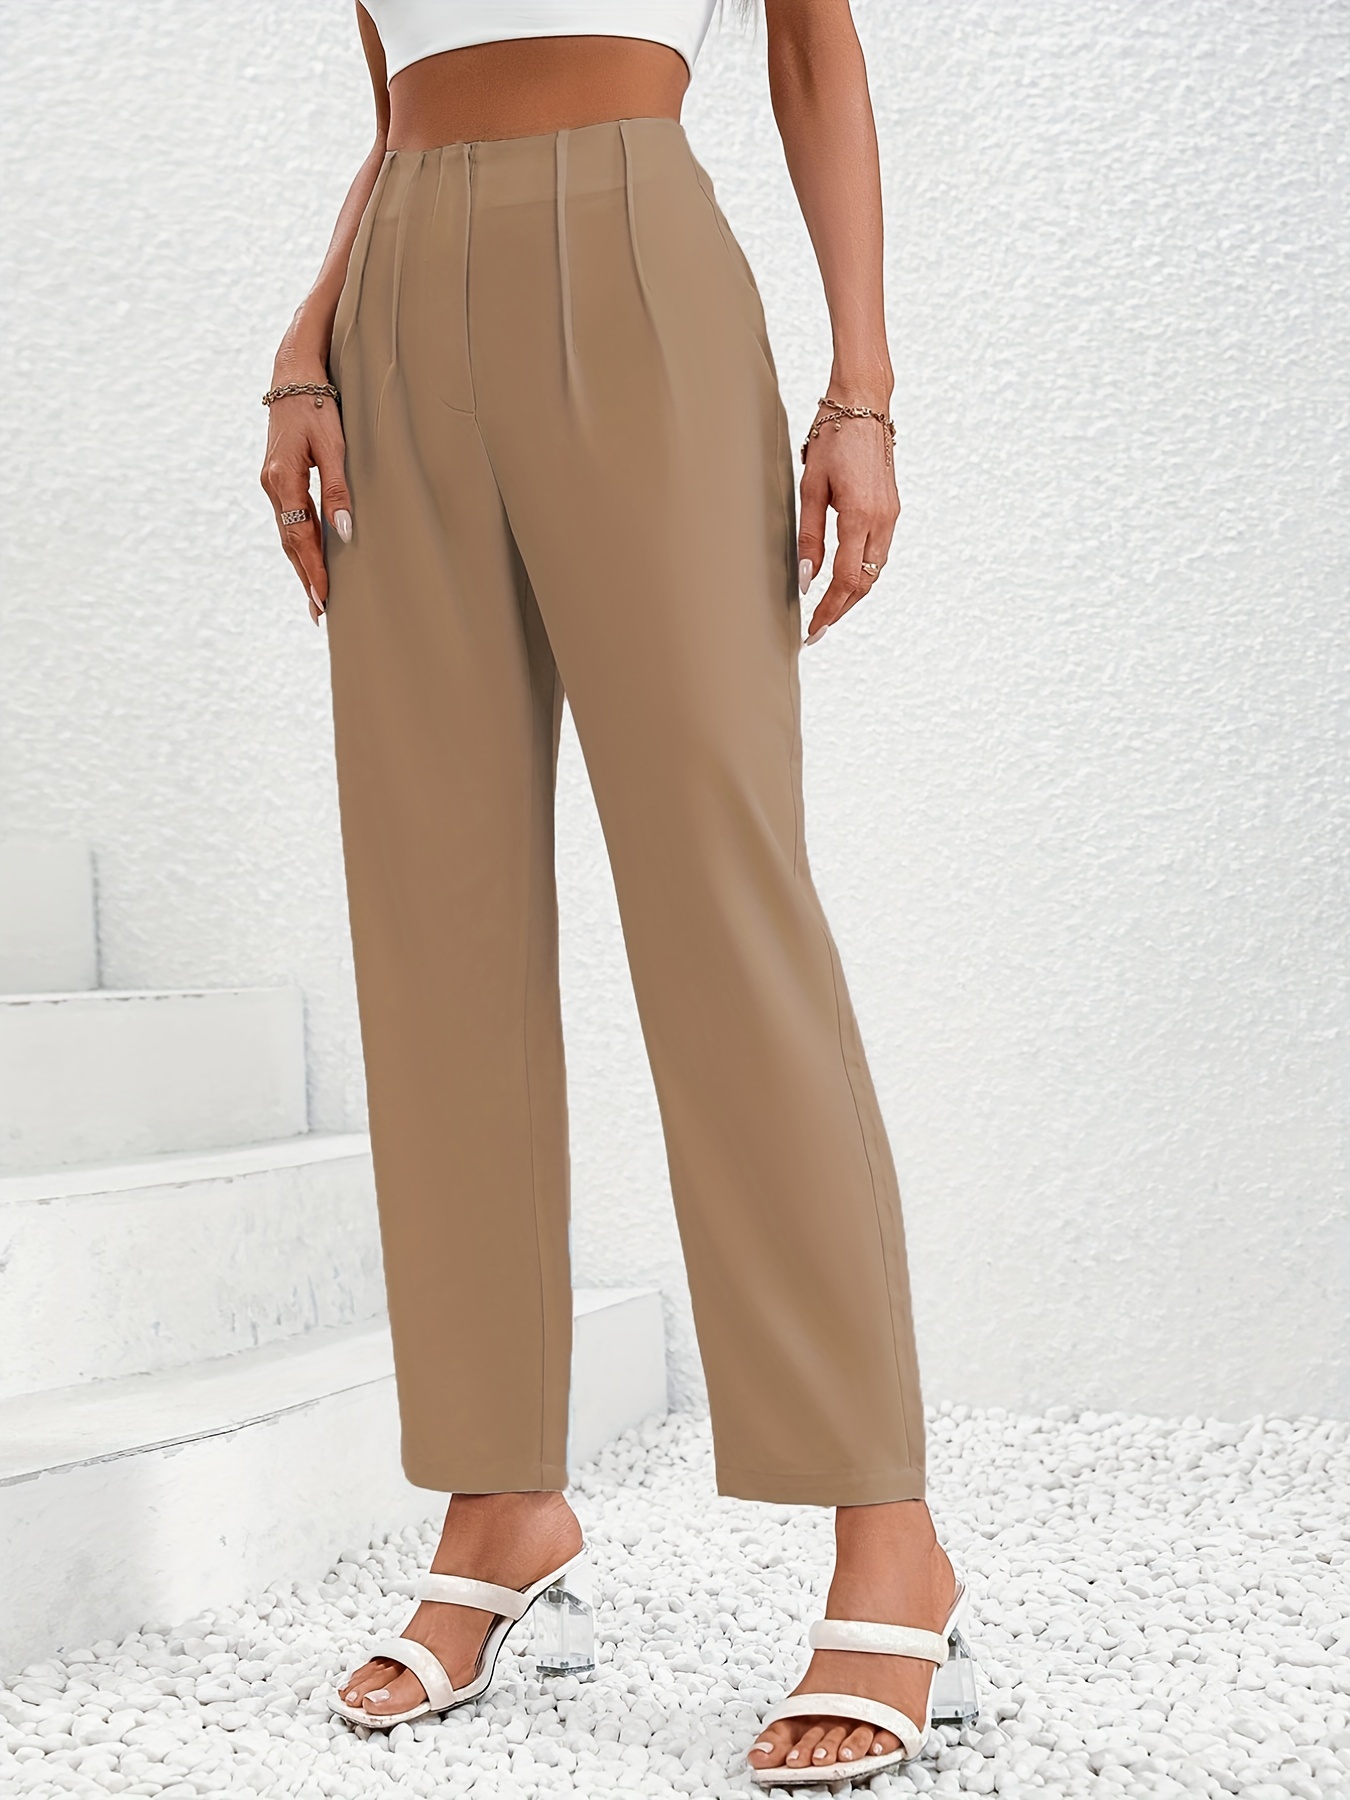 Ruched Wide Leg Pants, Elegant High Waist Solid Work Office Pants, Women's  Clothing